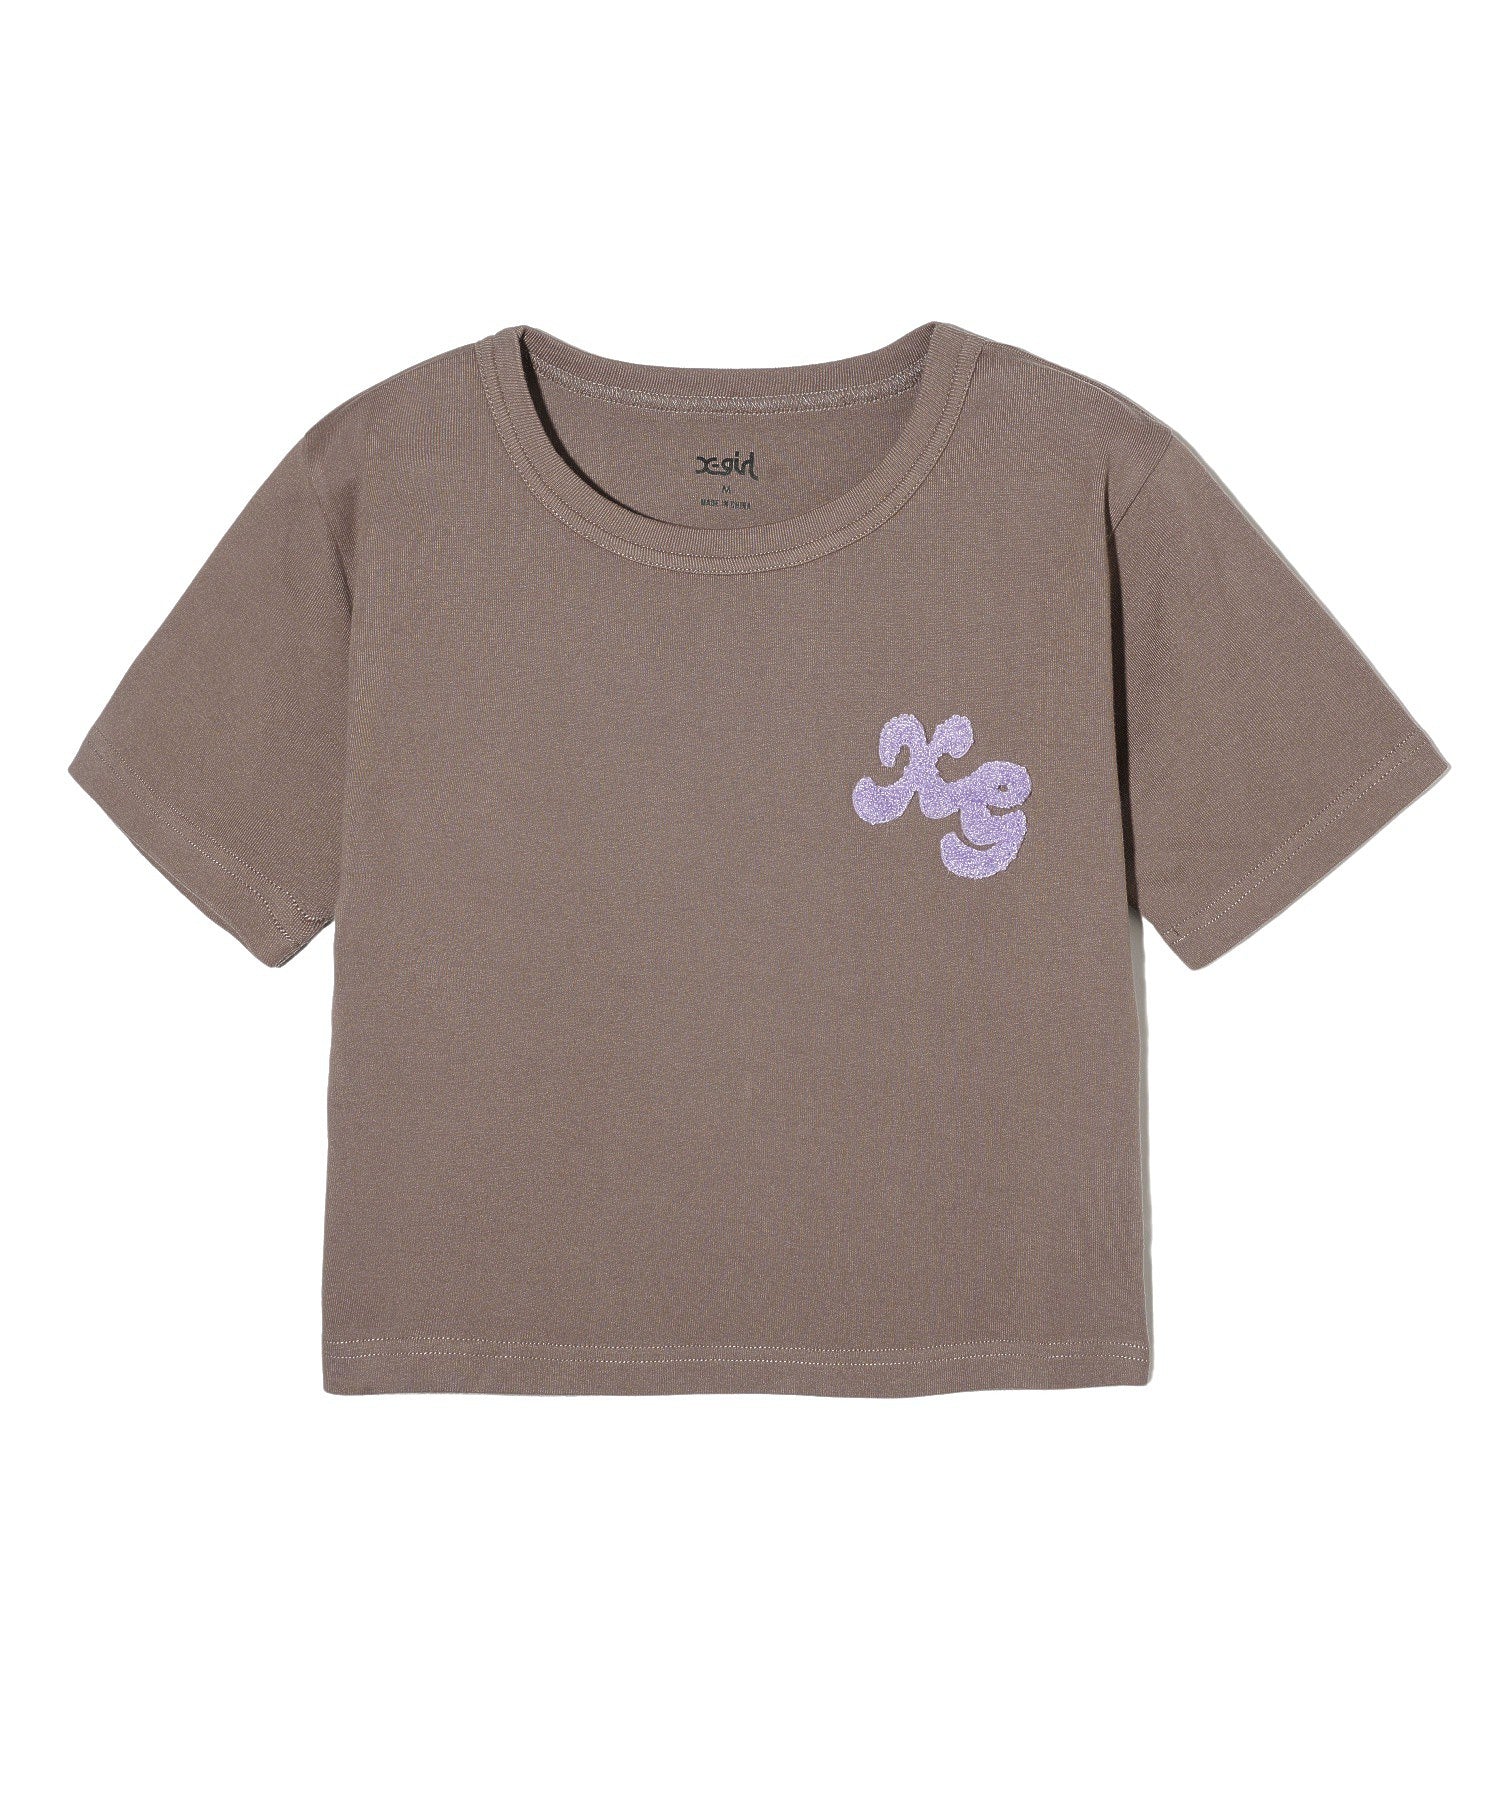 CHENILLE EMBROIDERED LOGO S/S TOP